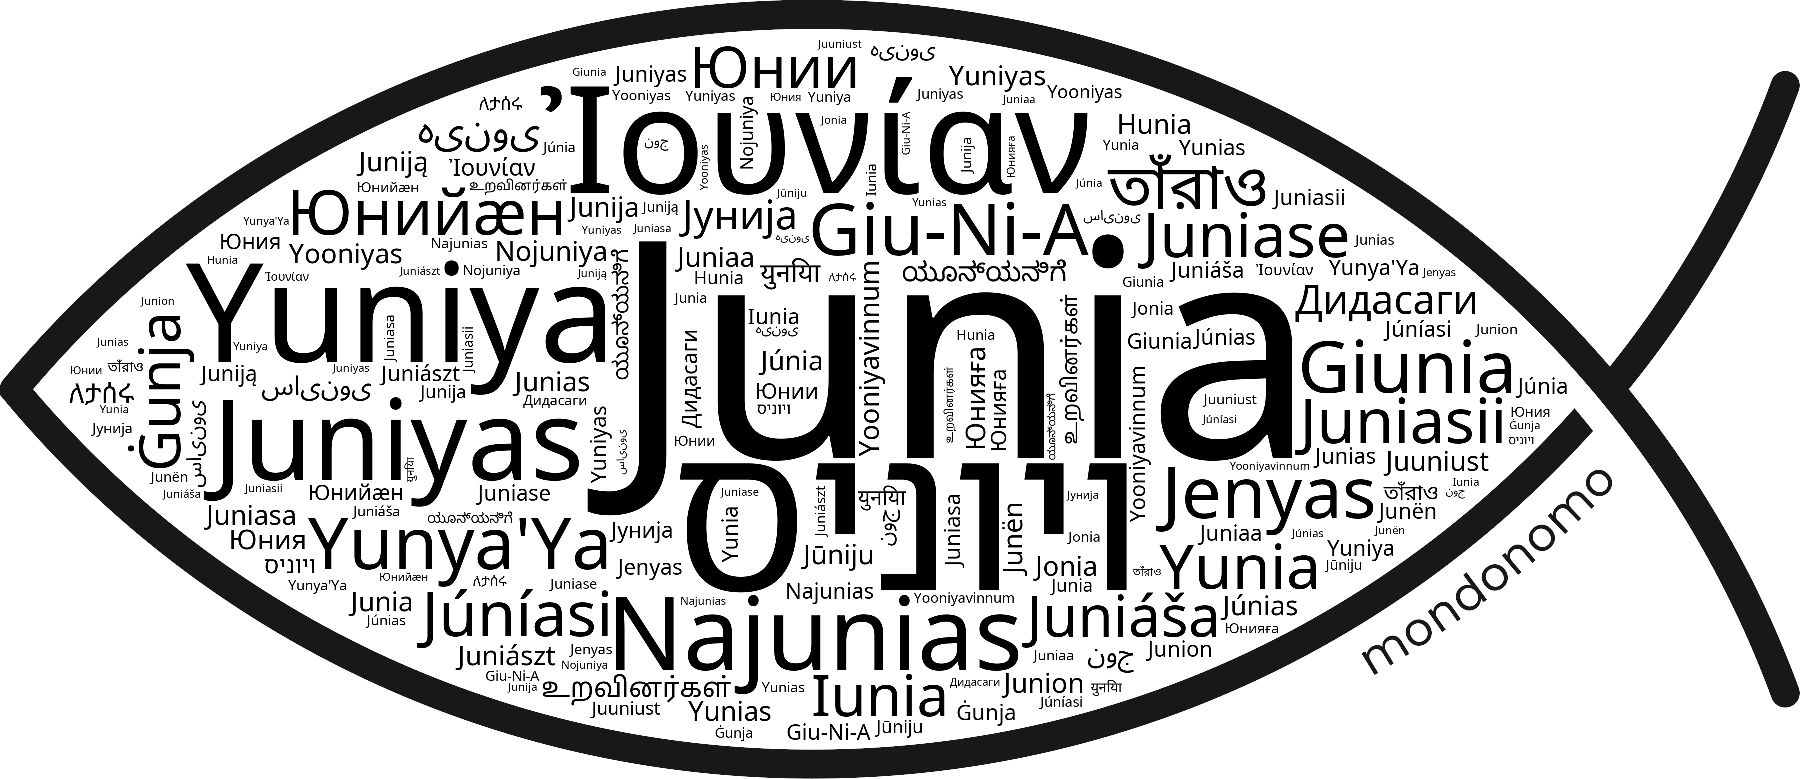 Name Junia in the world's Bibles